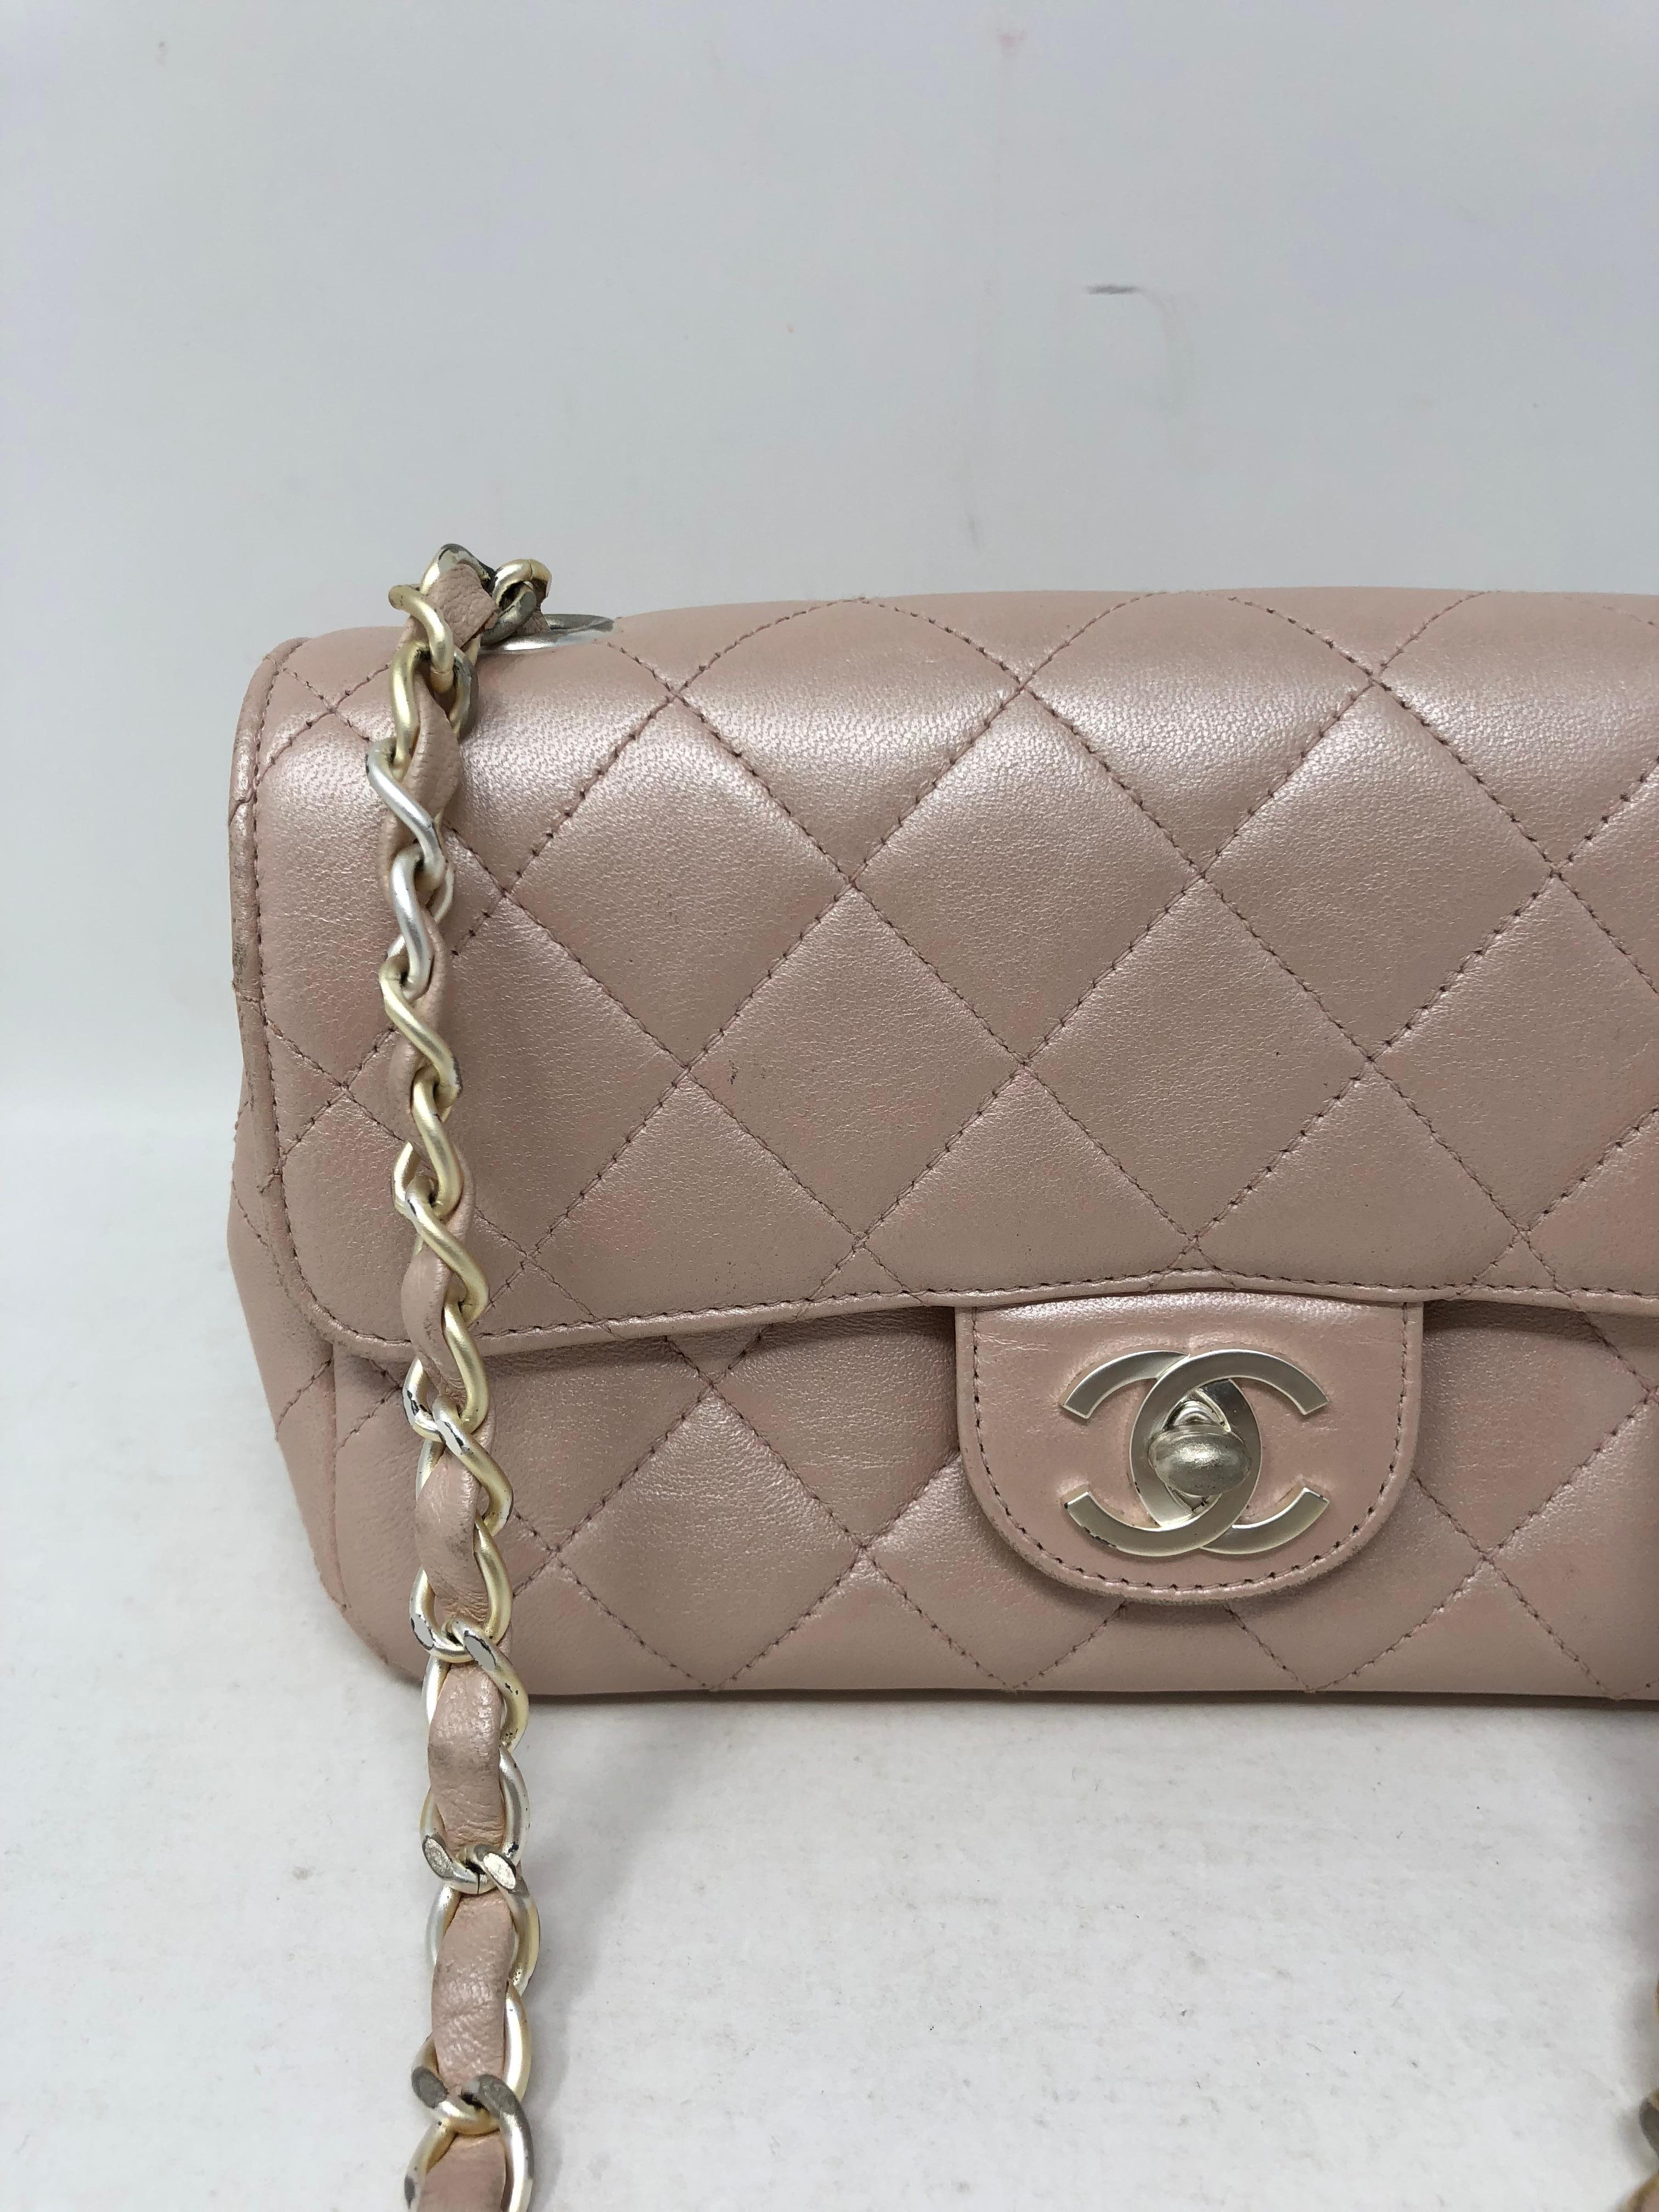 Chanel pale pink metallic crossbody bag with silver hardware. Fits a cell phone and wallet. Small size. Guaranteed authentic. 